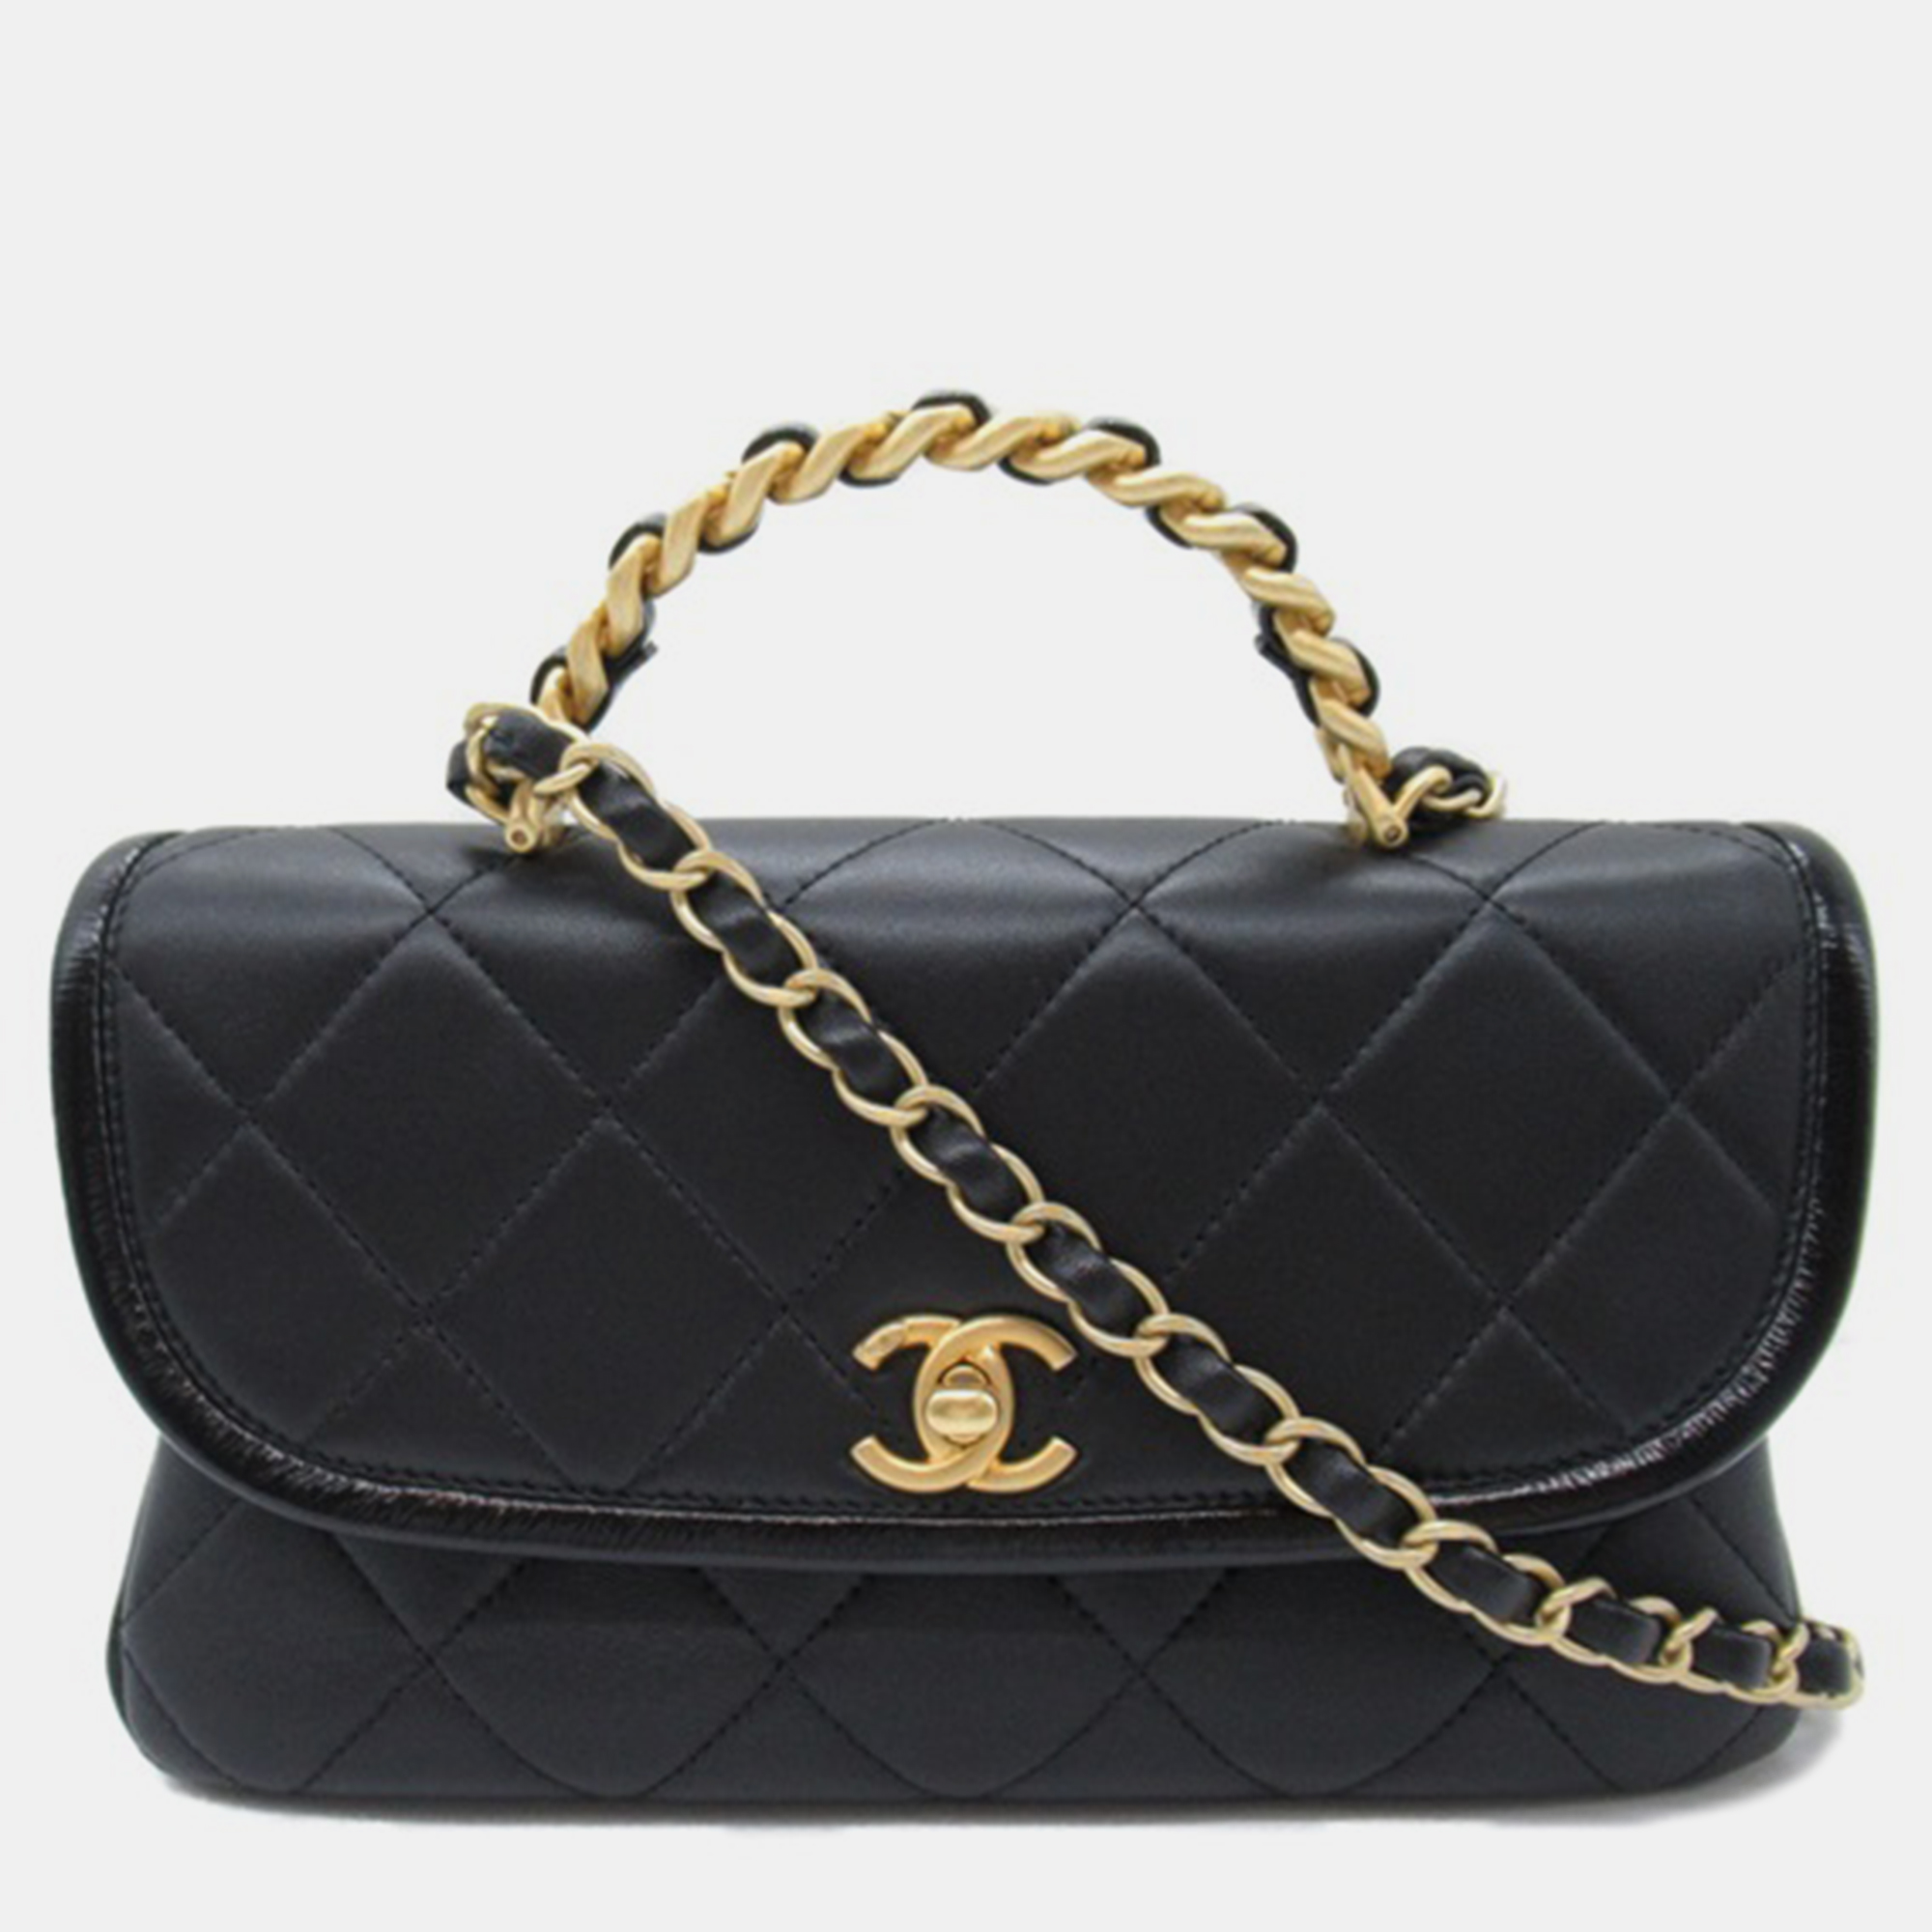 Chanel black leather cc quilted crumpled lambskin small handle chain bag